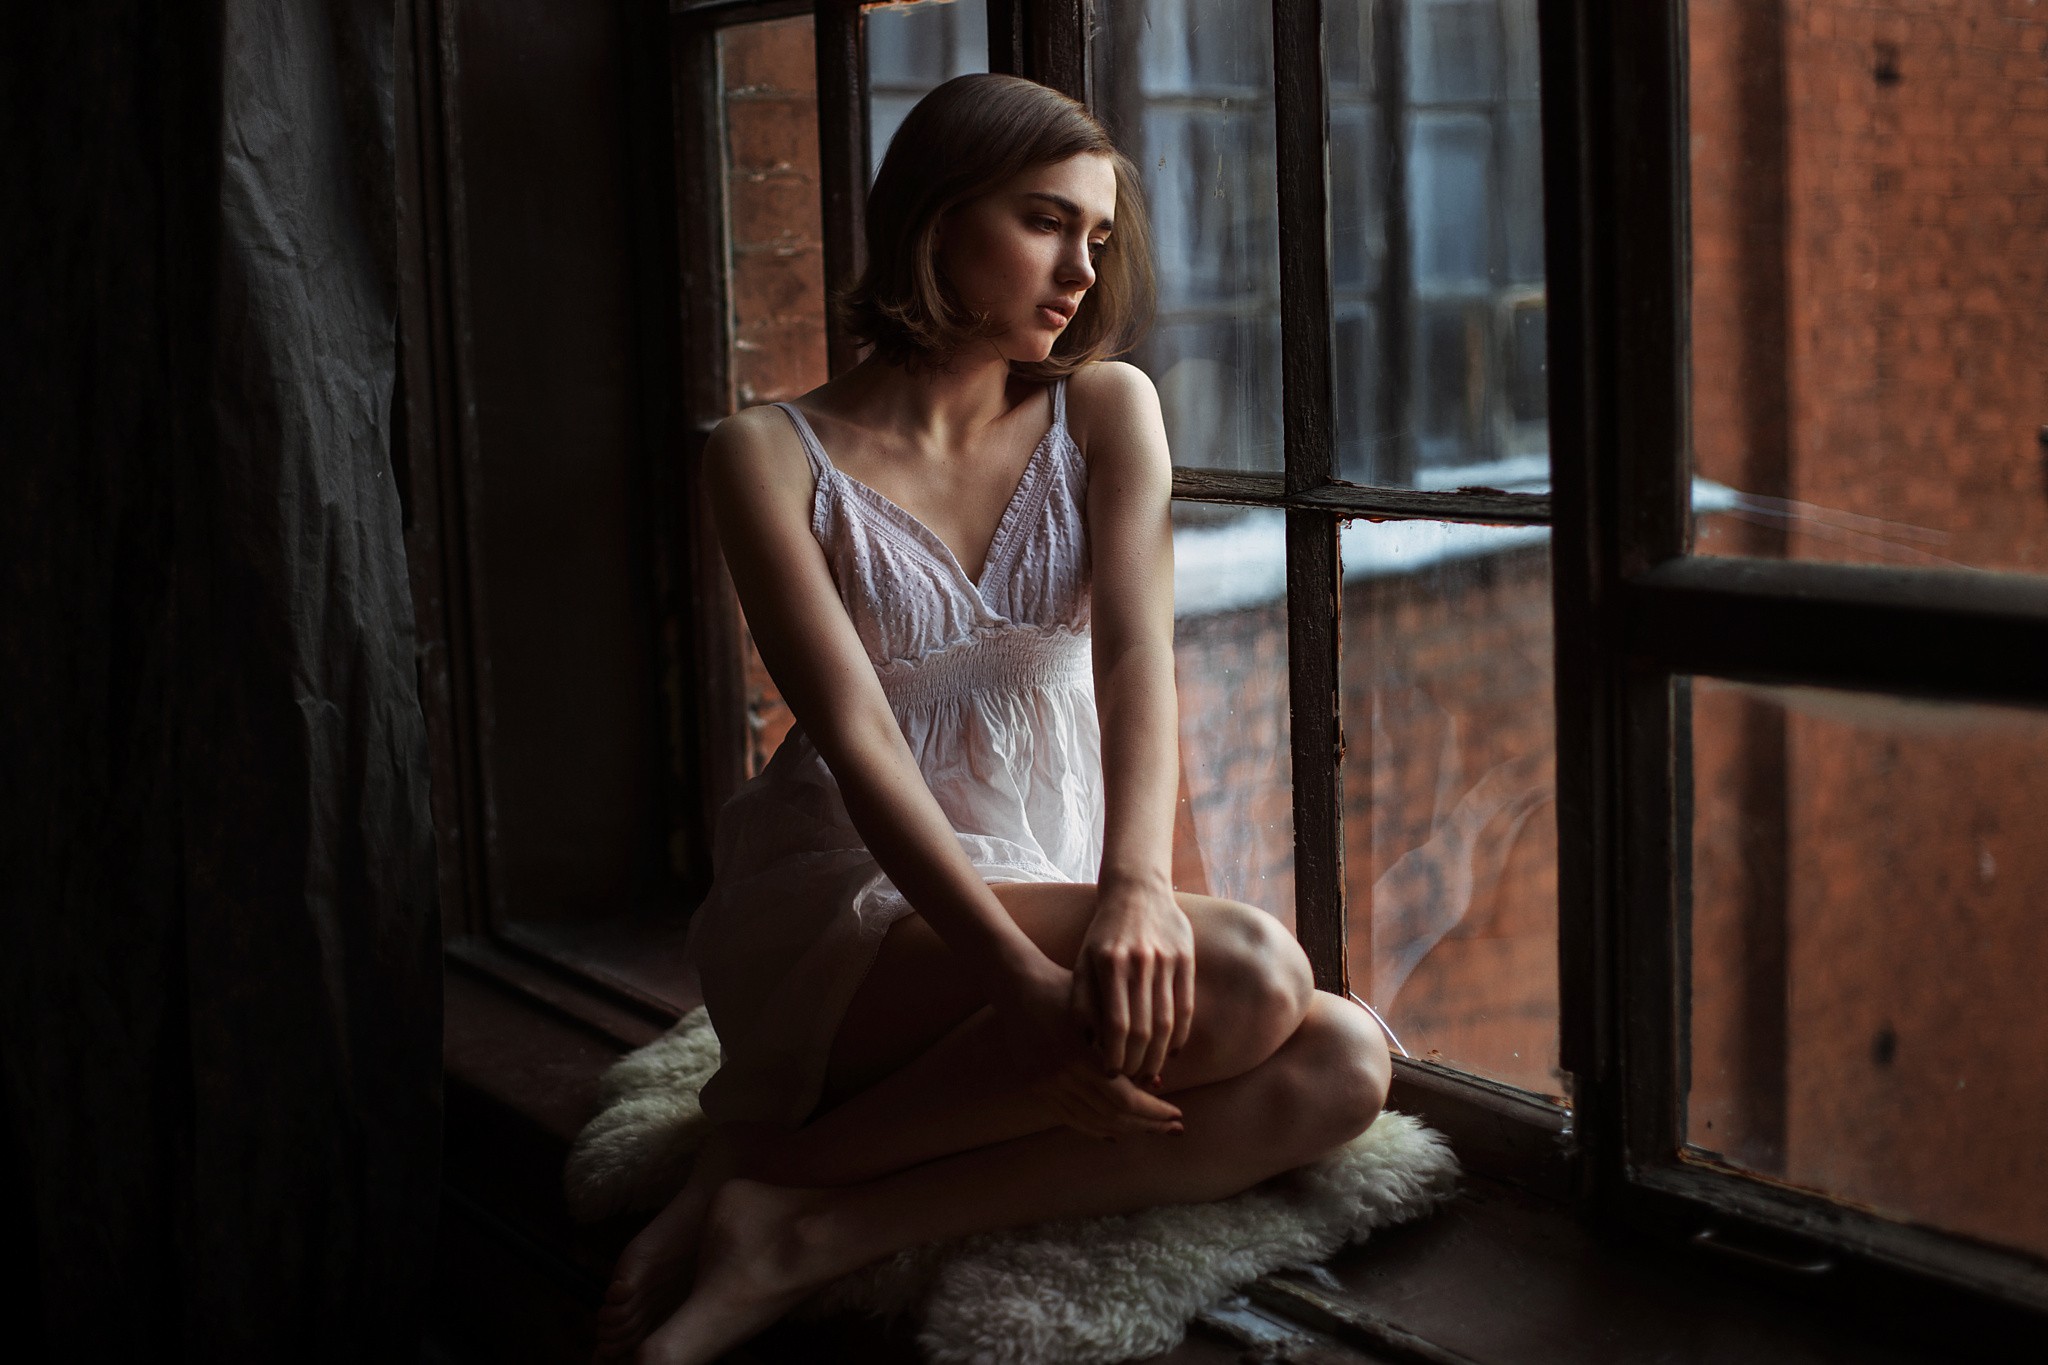 People 2048x1365 women white clothing brunette window Evgeniy Reshetov looking out window knees together women indoors indoors model barefoot nightgown